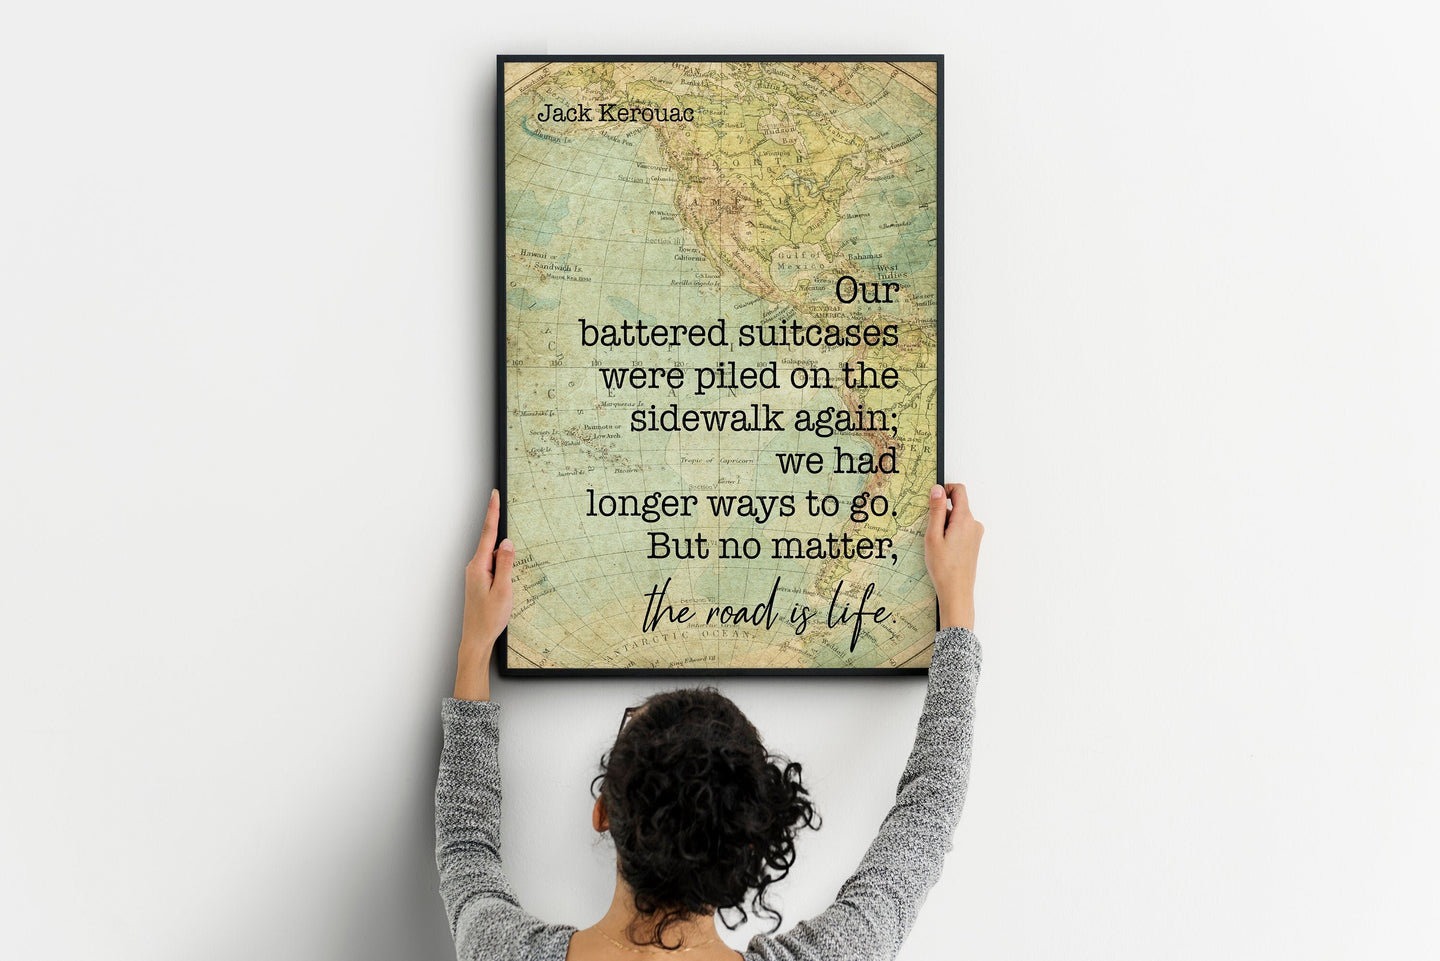 Jack Kerouac Quote - we had longer ways to go. But no matter, the road is life - travel Print for library office wall Art UNFRAMED